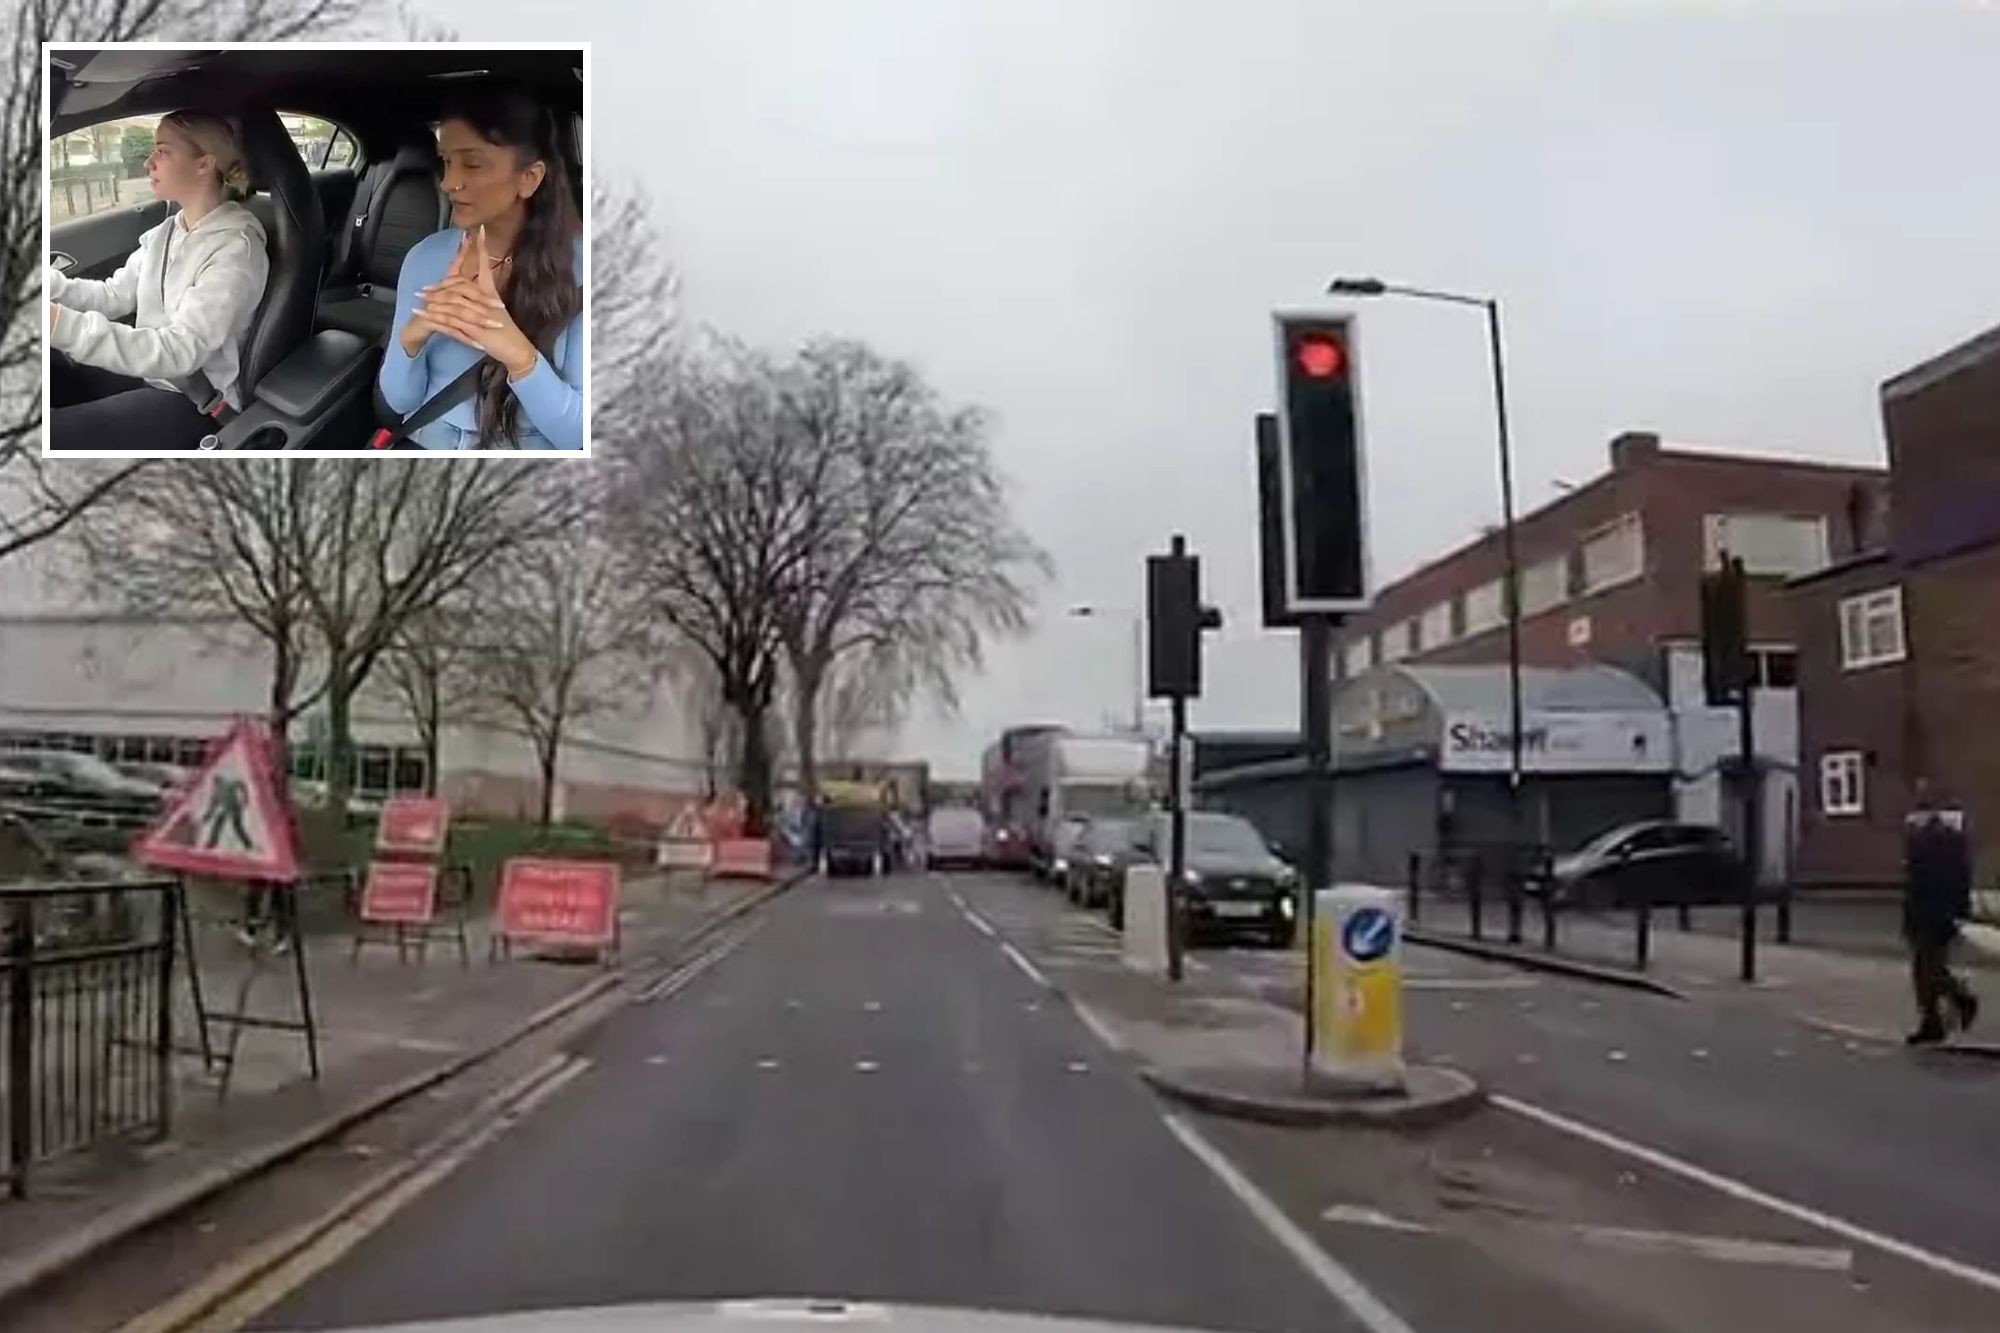 Watch moment learner driver fails driving test for stopping at RED light